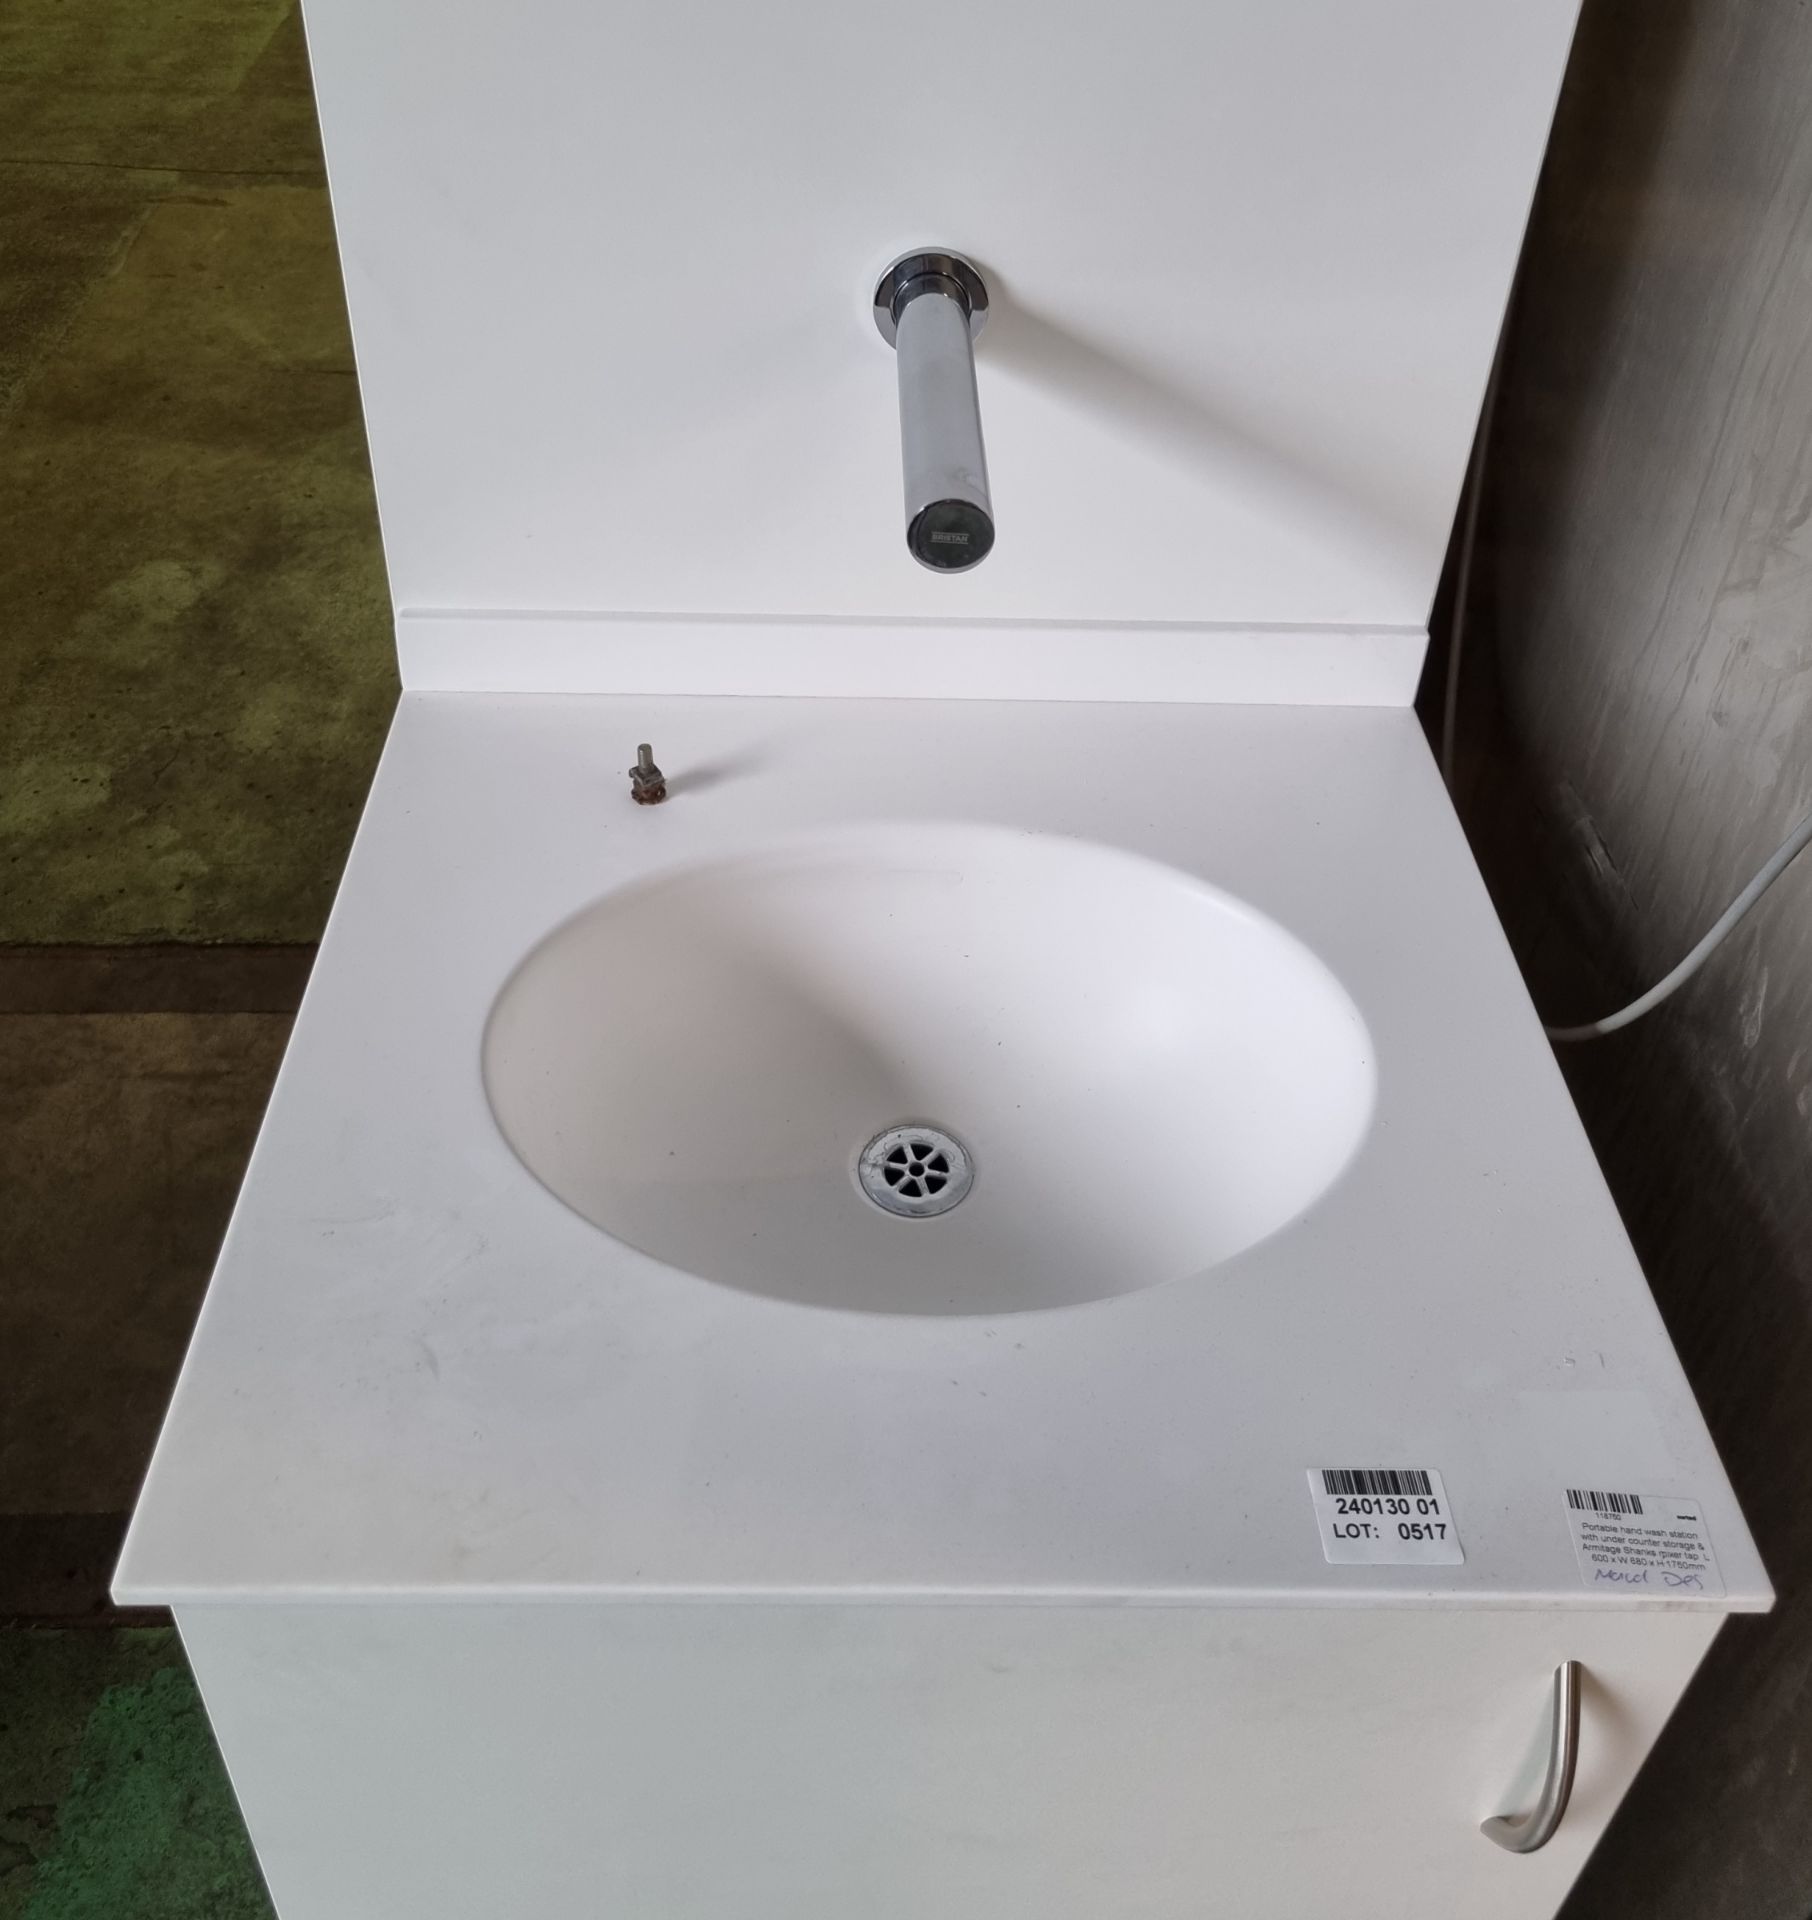 Portable hand wash station with under counter storage & Armitage Shanks mixer tap L 600 x W 680 - Image 5 of 5